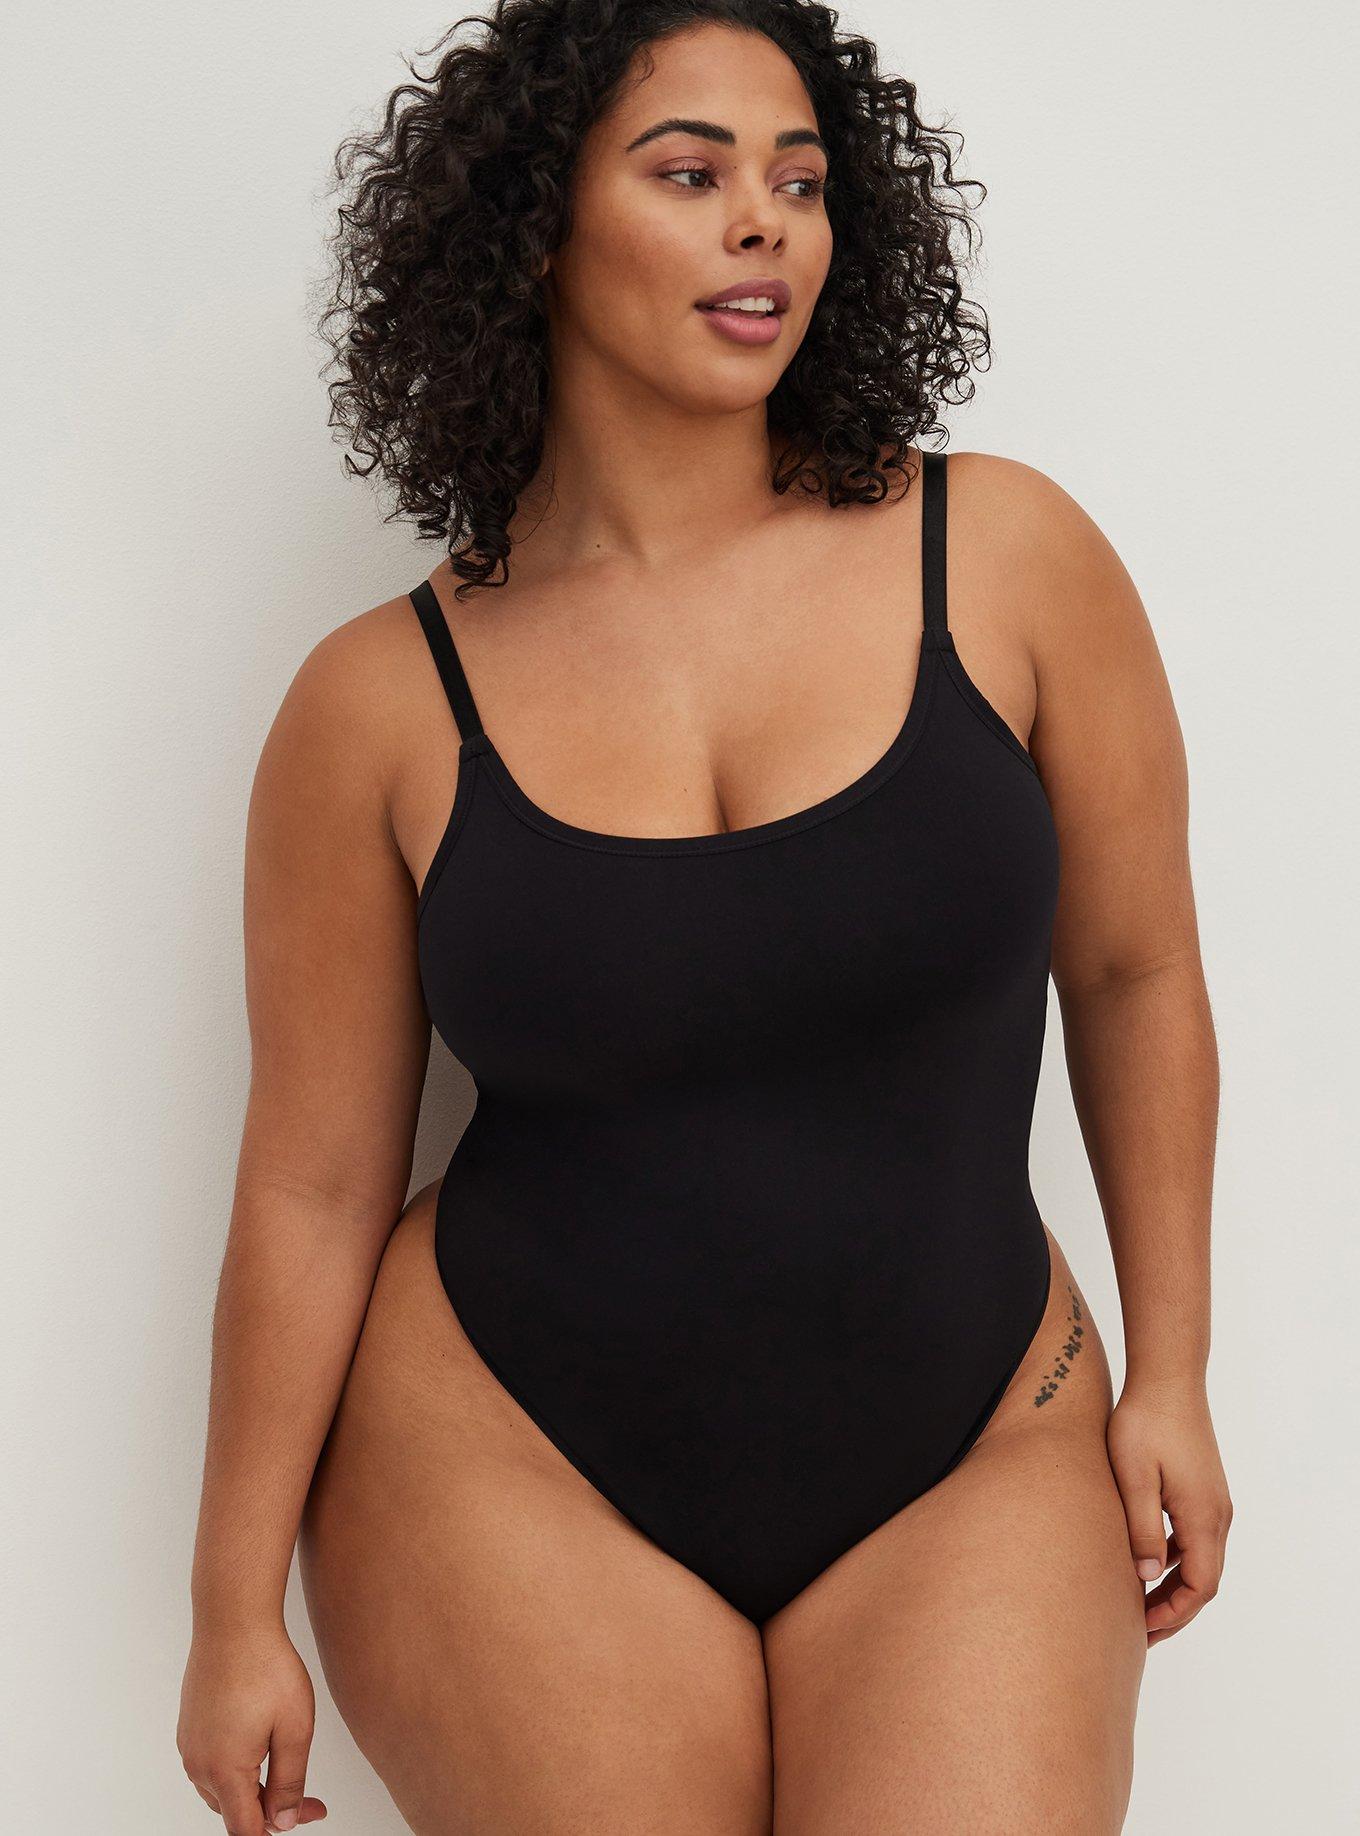 How's the sizing for the Seamless Sculpt Strapless Thong Bodysuit